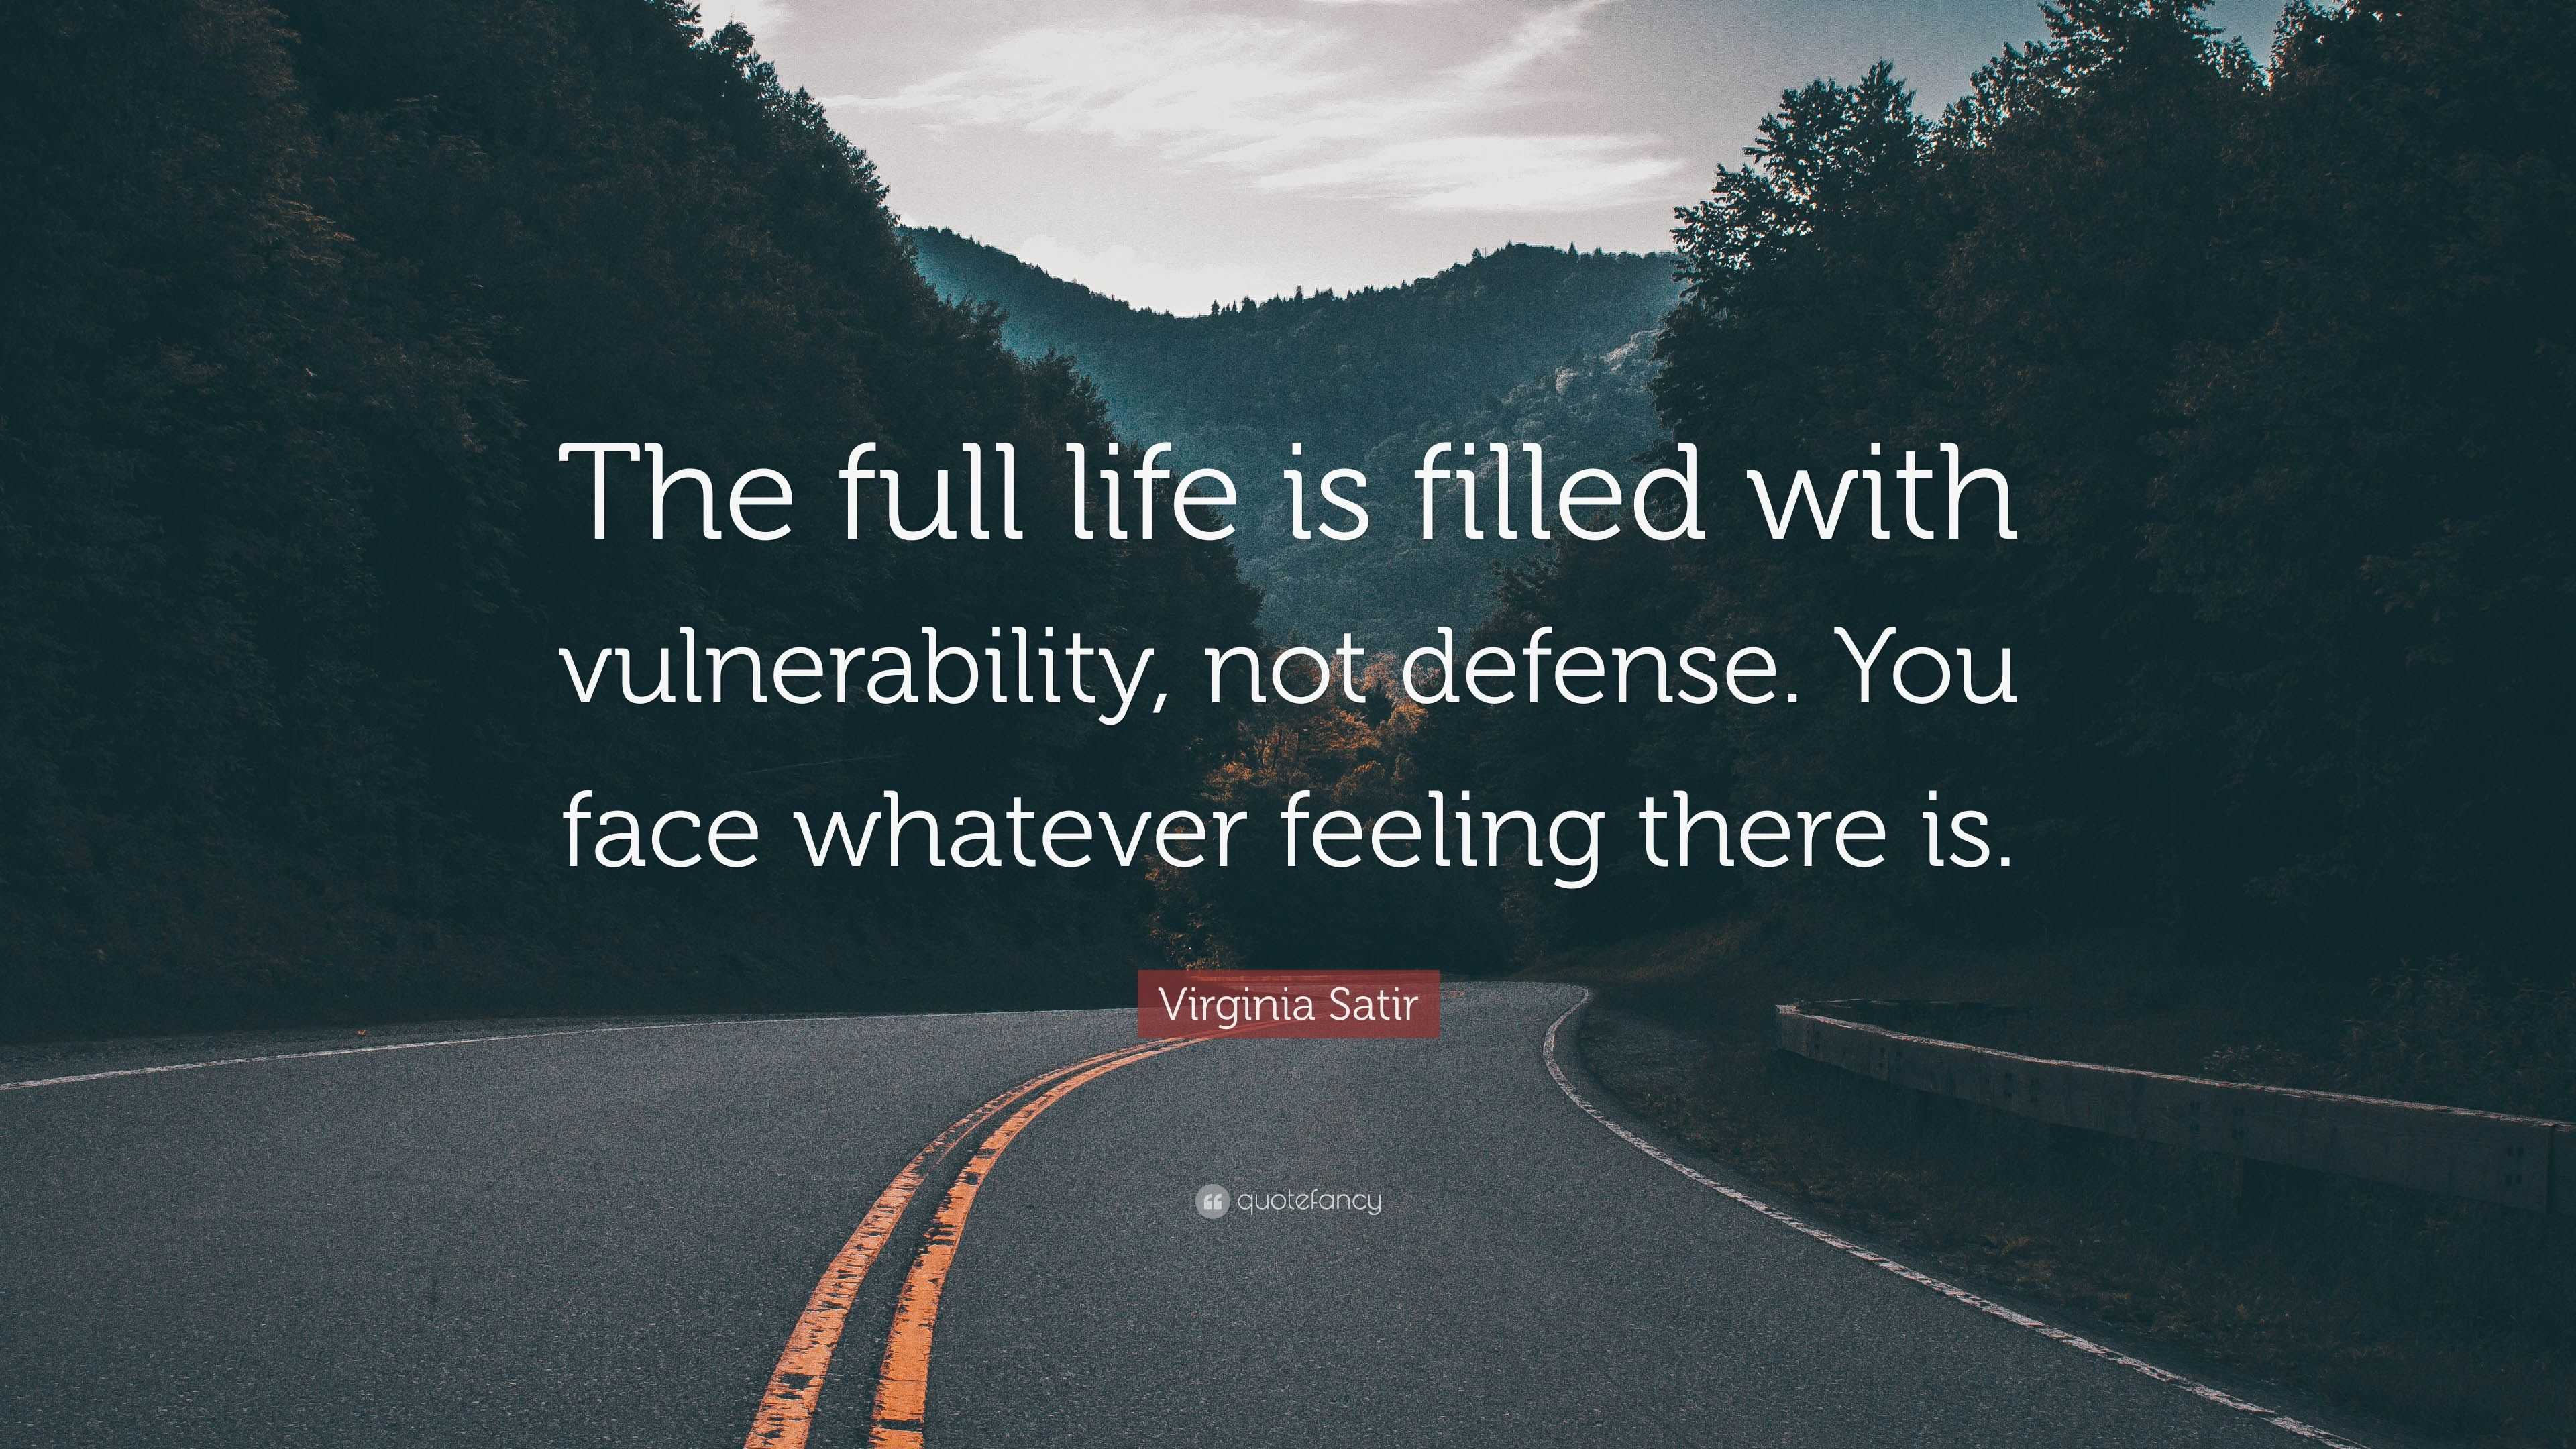 Virginia Satir Quote: “The full life is filled with vulnerability, not ...